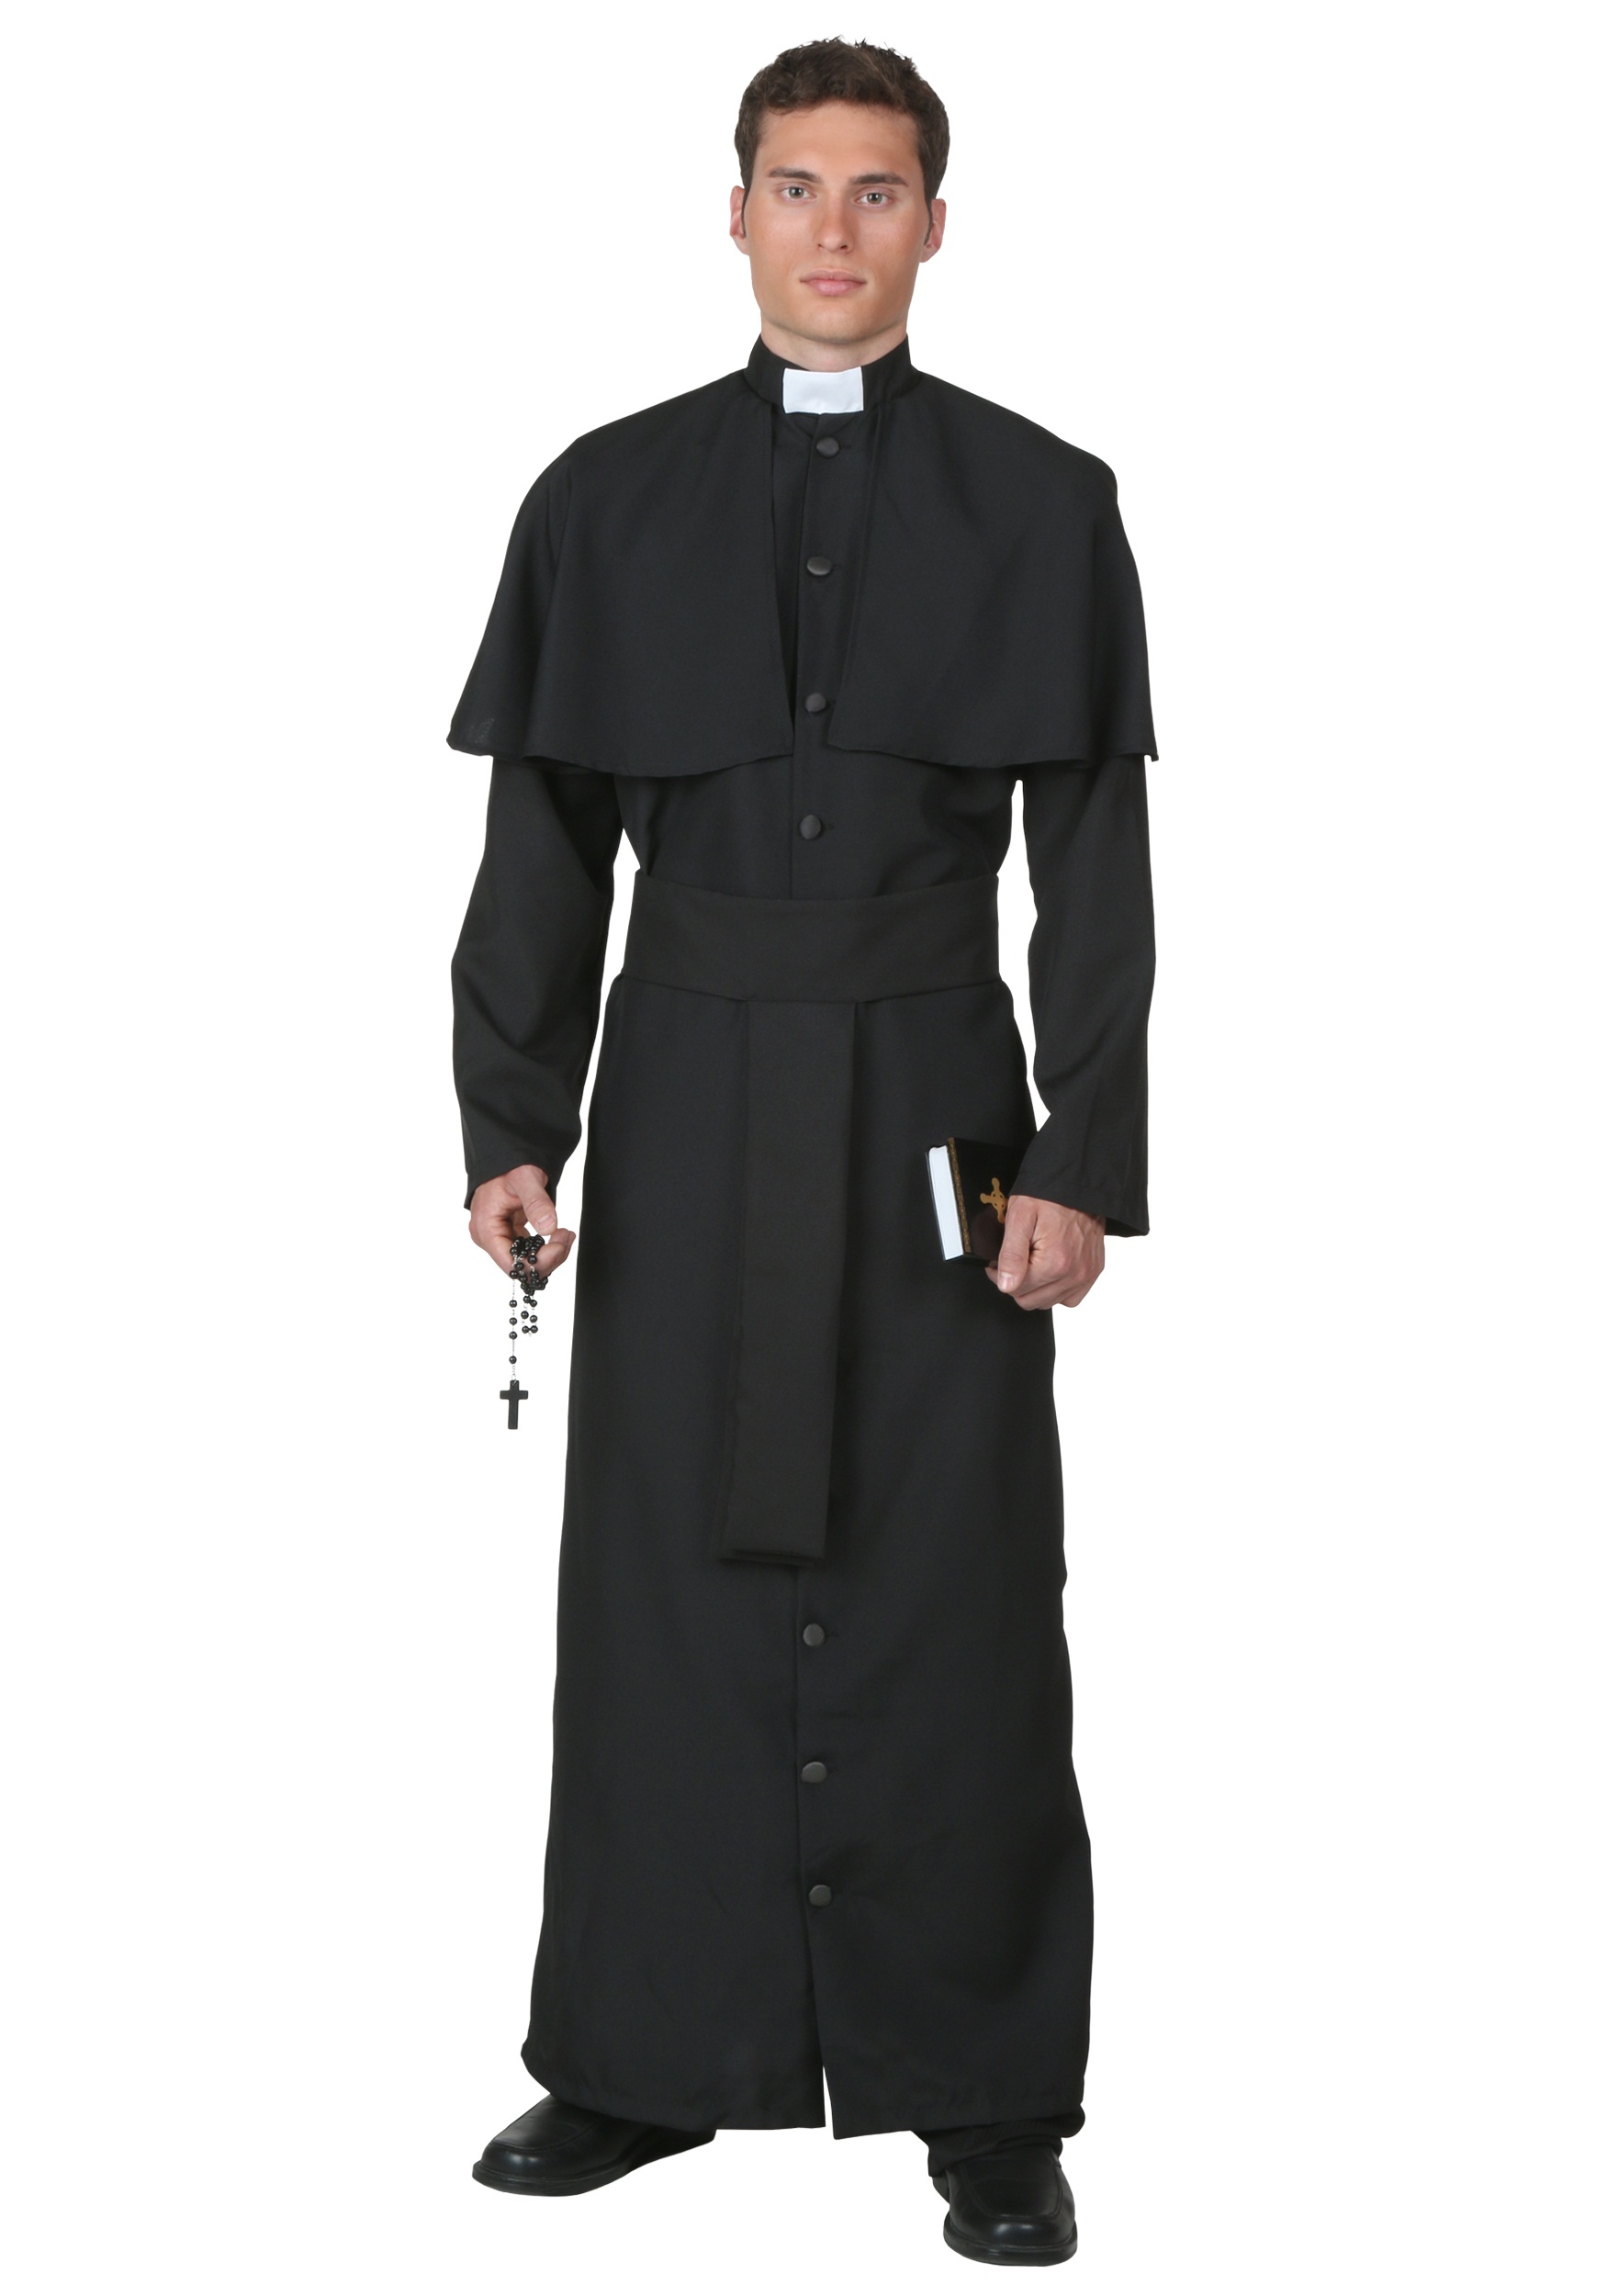 Photos - Fancy Dress Deluxe FUN Costumes  Priest Costume | Religious Adult Costumes | Exclusive 